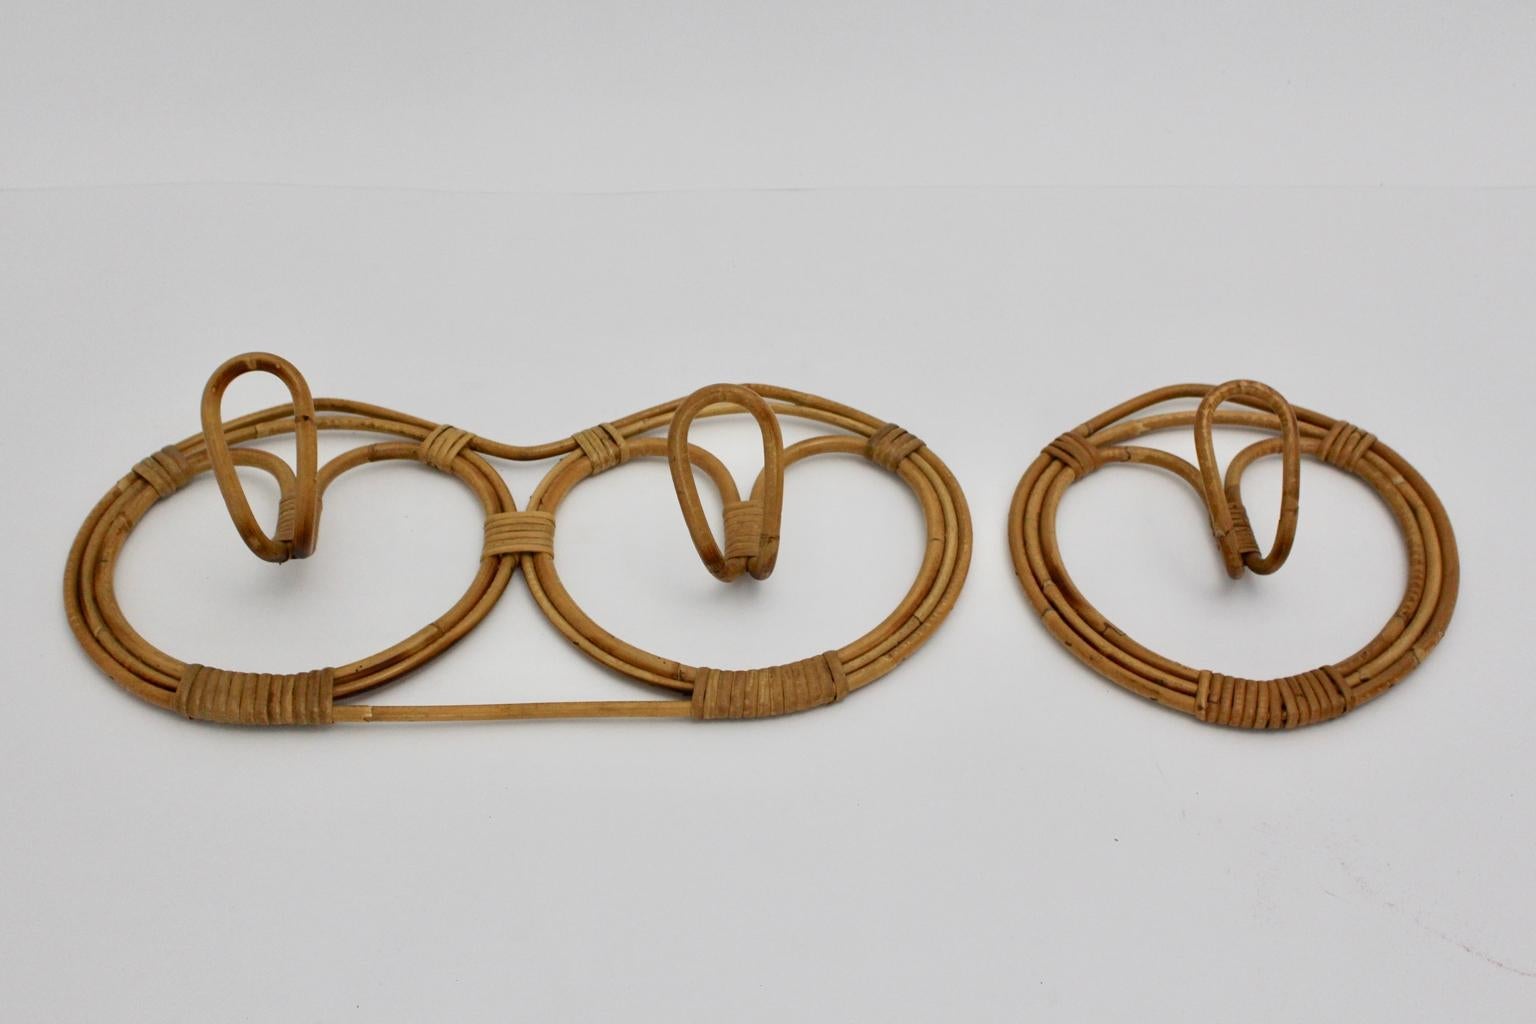 This set of vintage rattan coat hooks was designed in Italy, 1960s.
The charming rattan set consists of two pieces, one double coat hook and one single coat hook. 
The color of the rattan set is beautiful through its brown tone.
Very good vintage